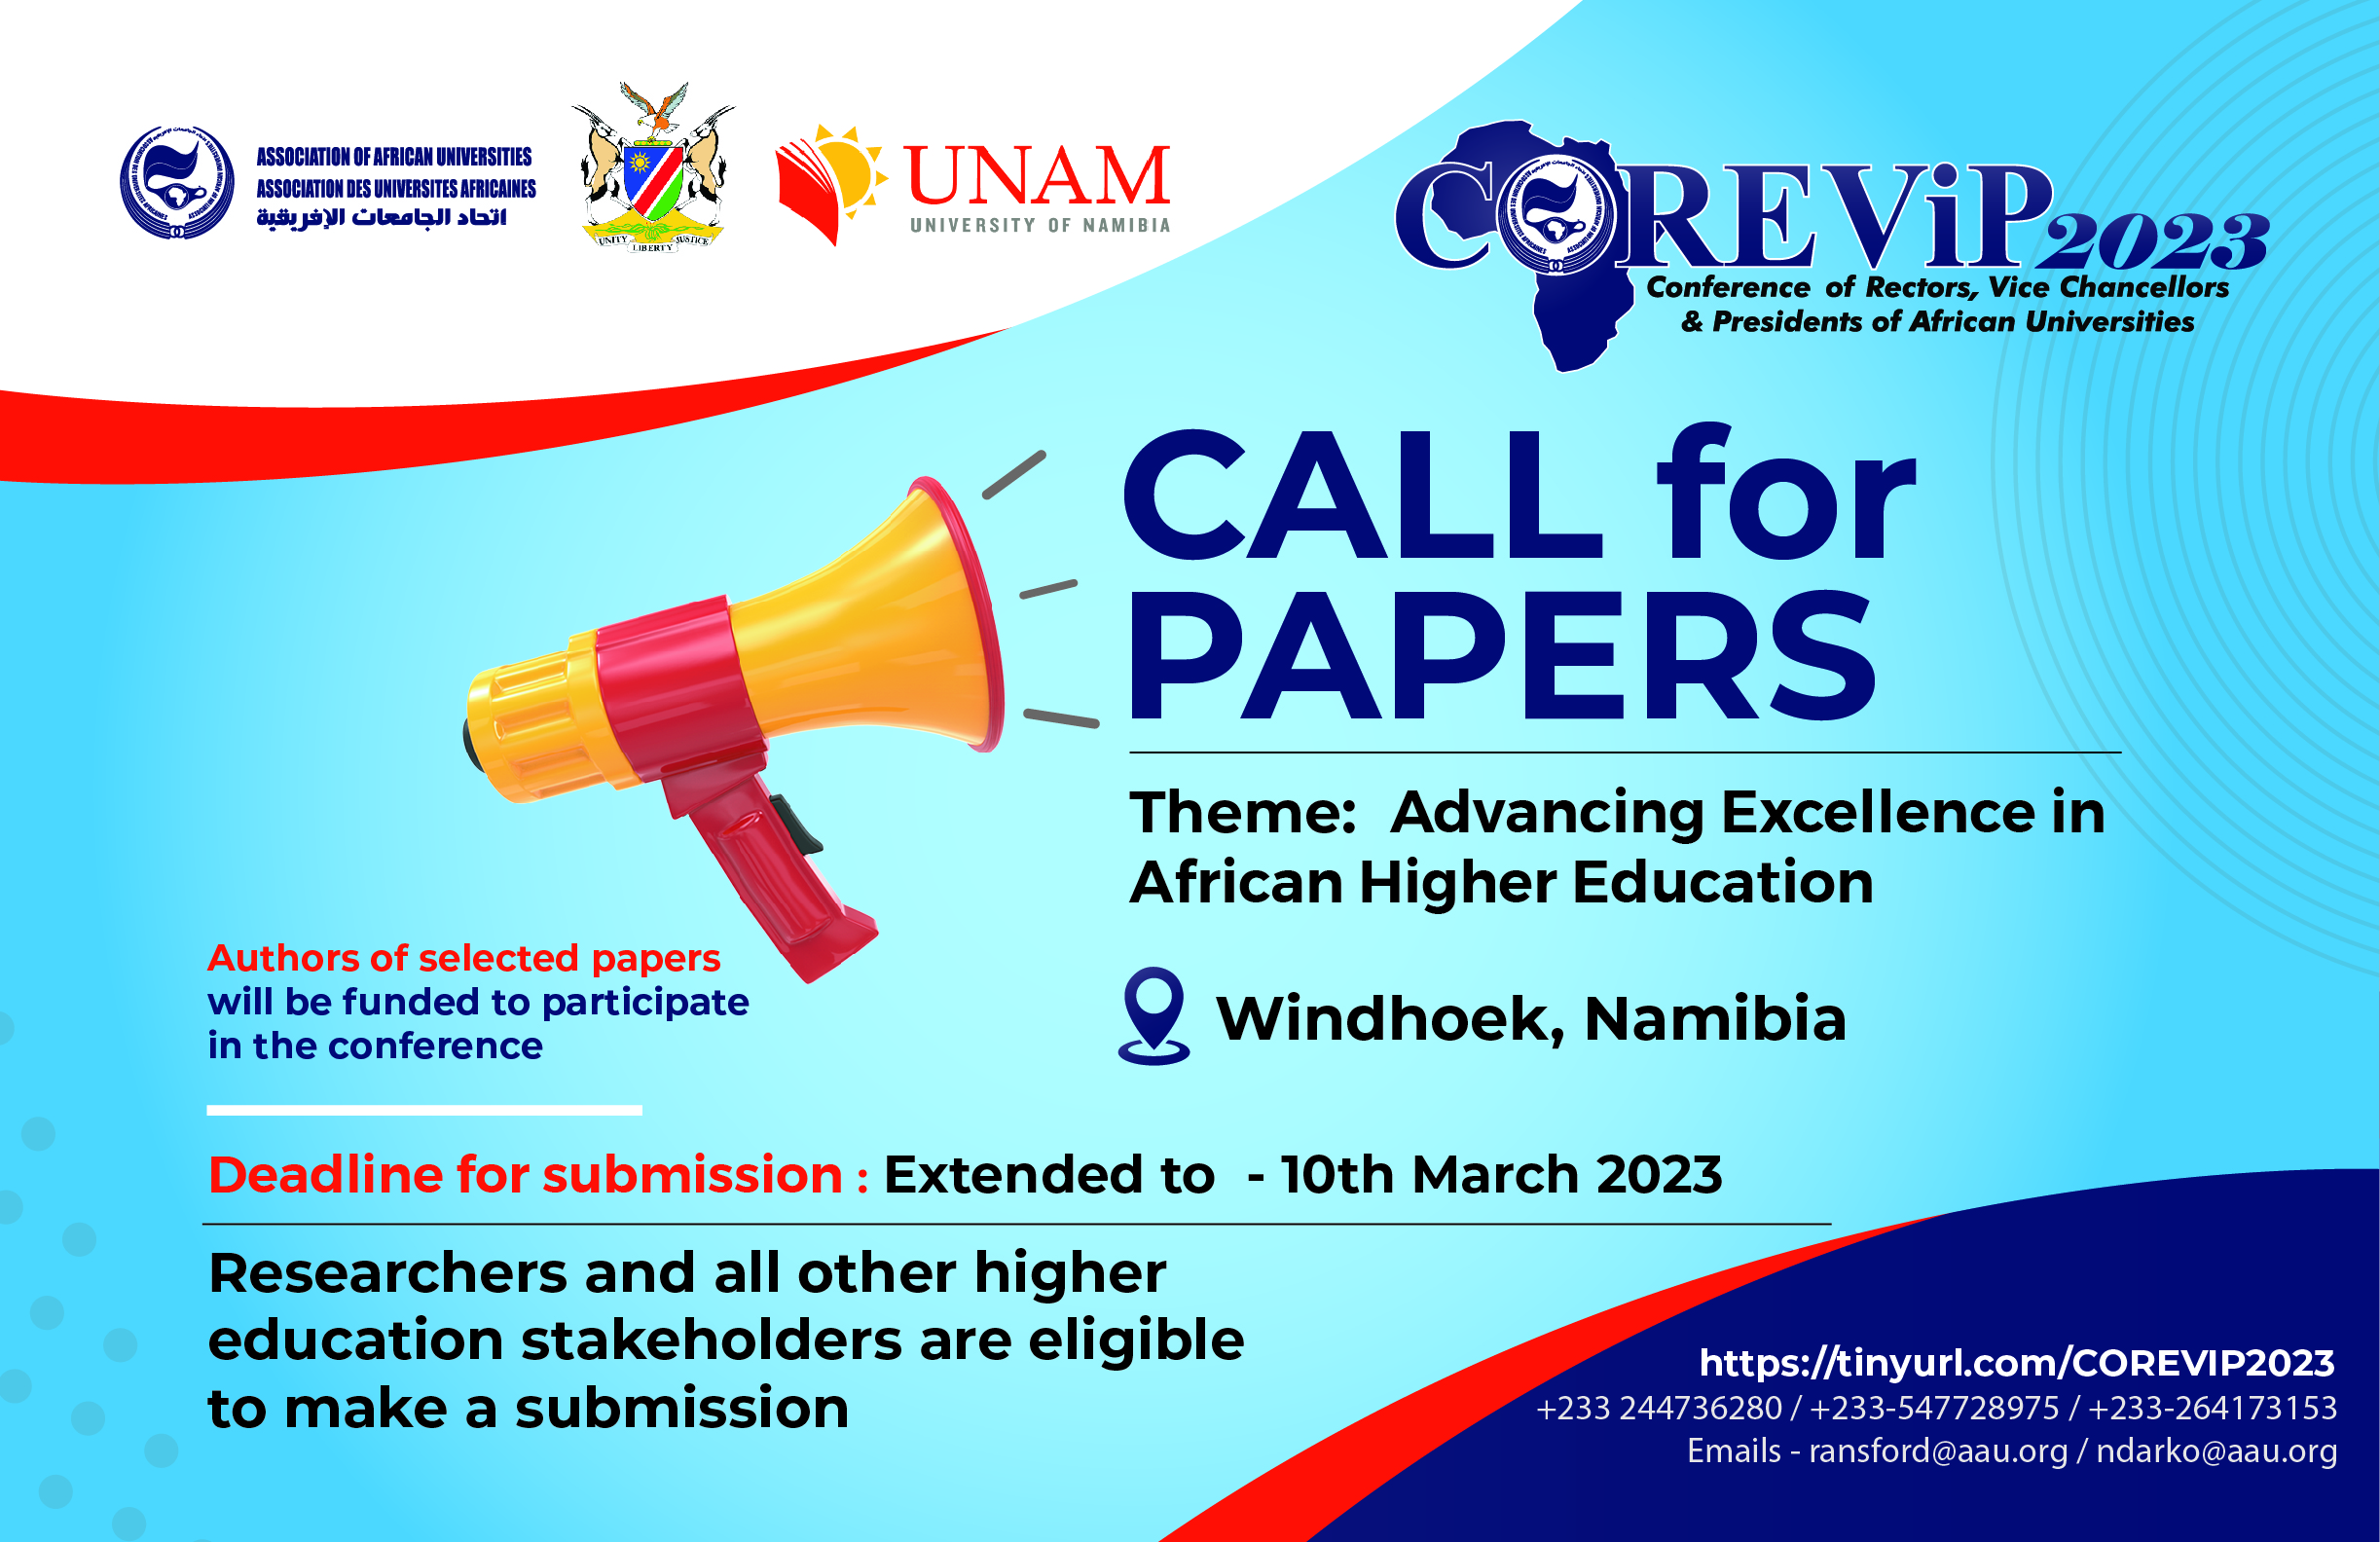 Call for Papers 2023 Conference of Rectors, ViceChancellors